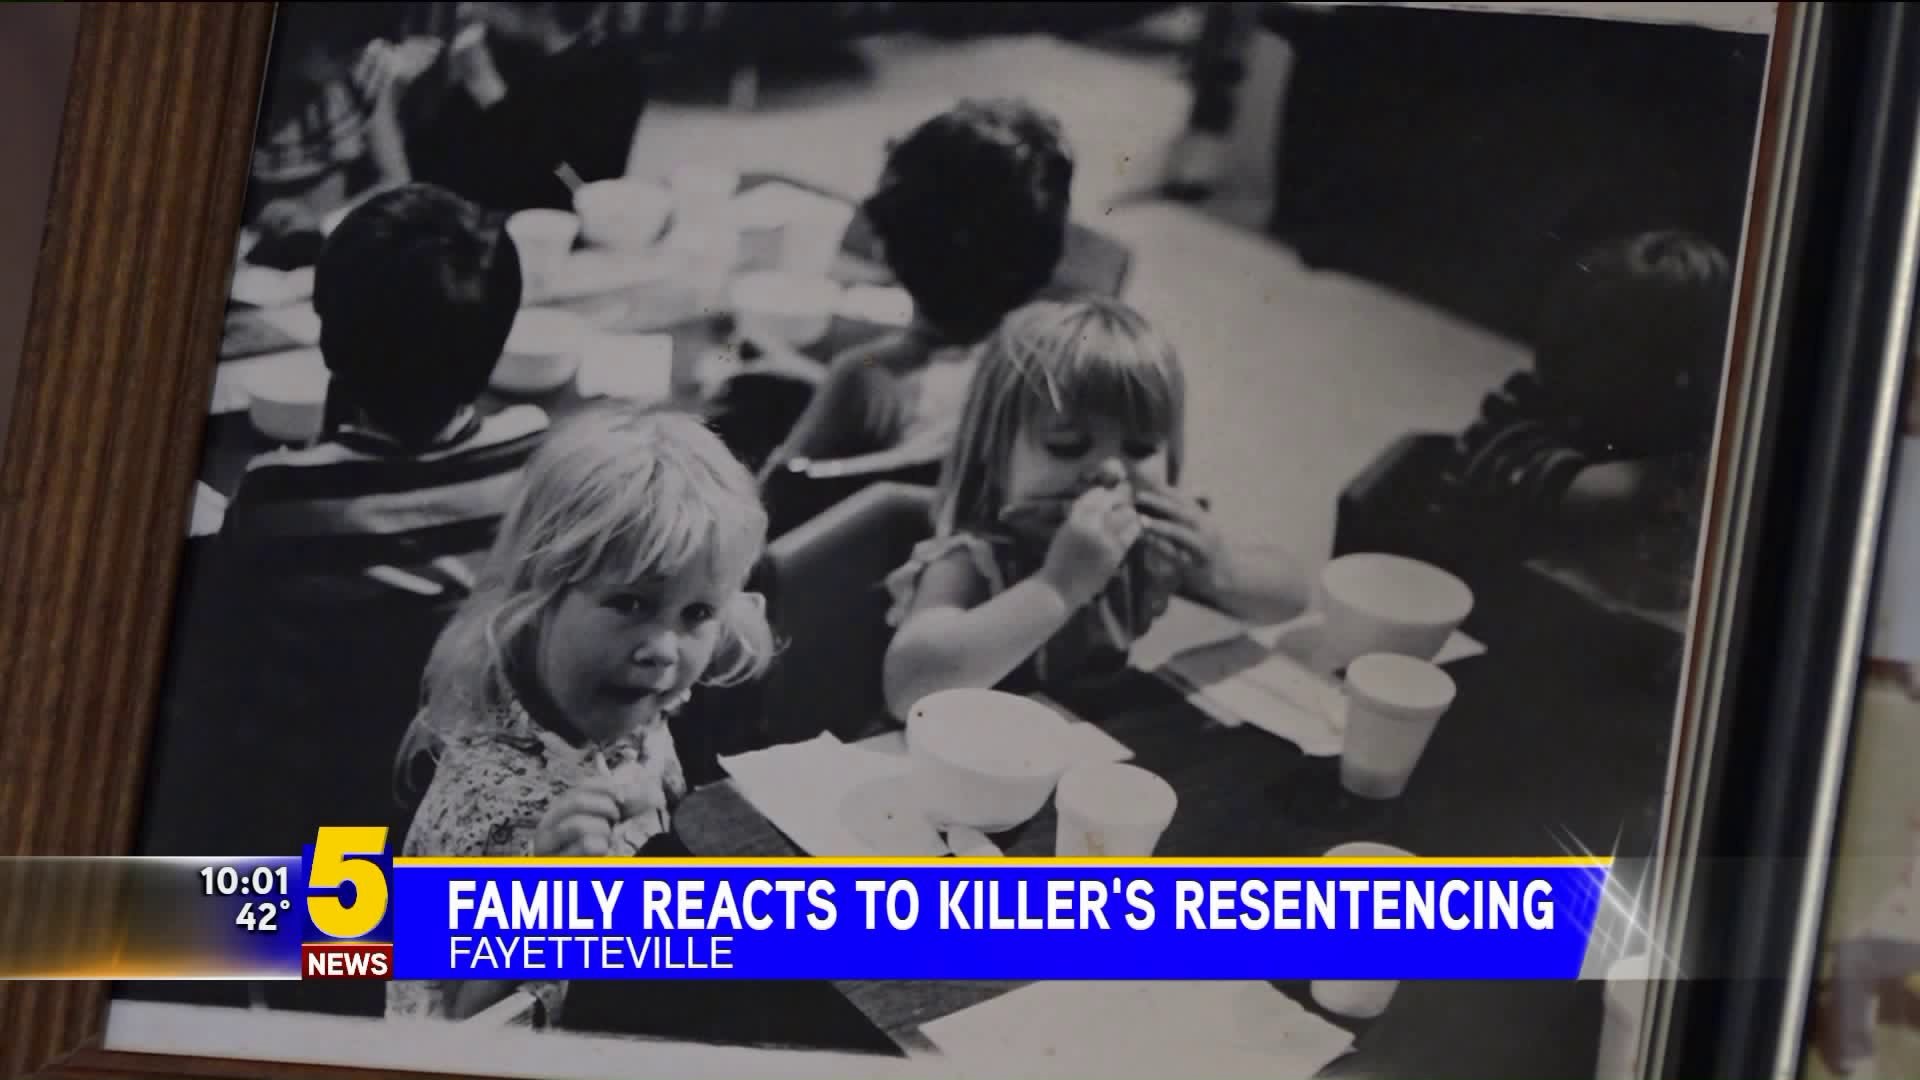 Family Reacts To Killers Resentencing in Fayetteville